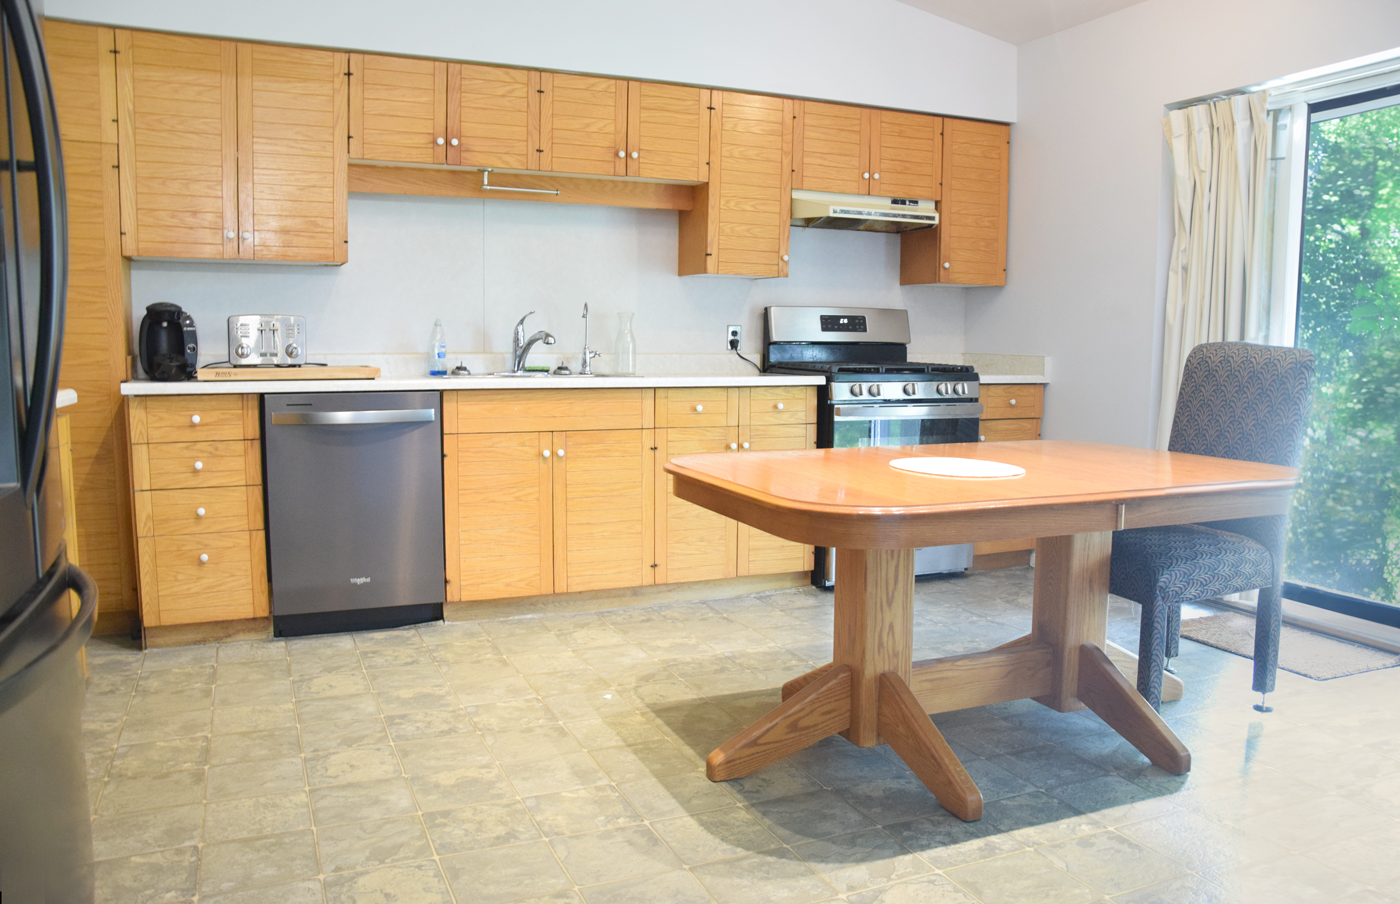 Kitchen with stove, dishwasher and dining room table